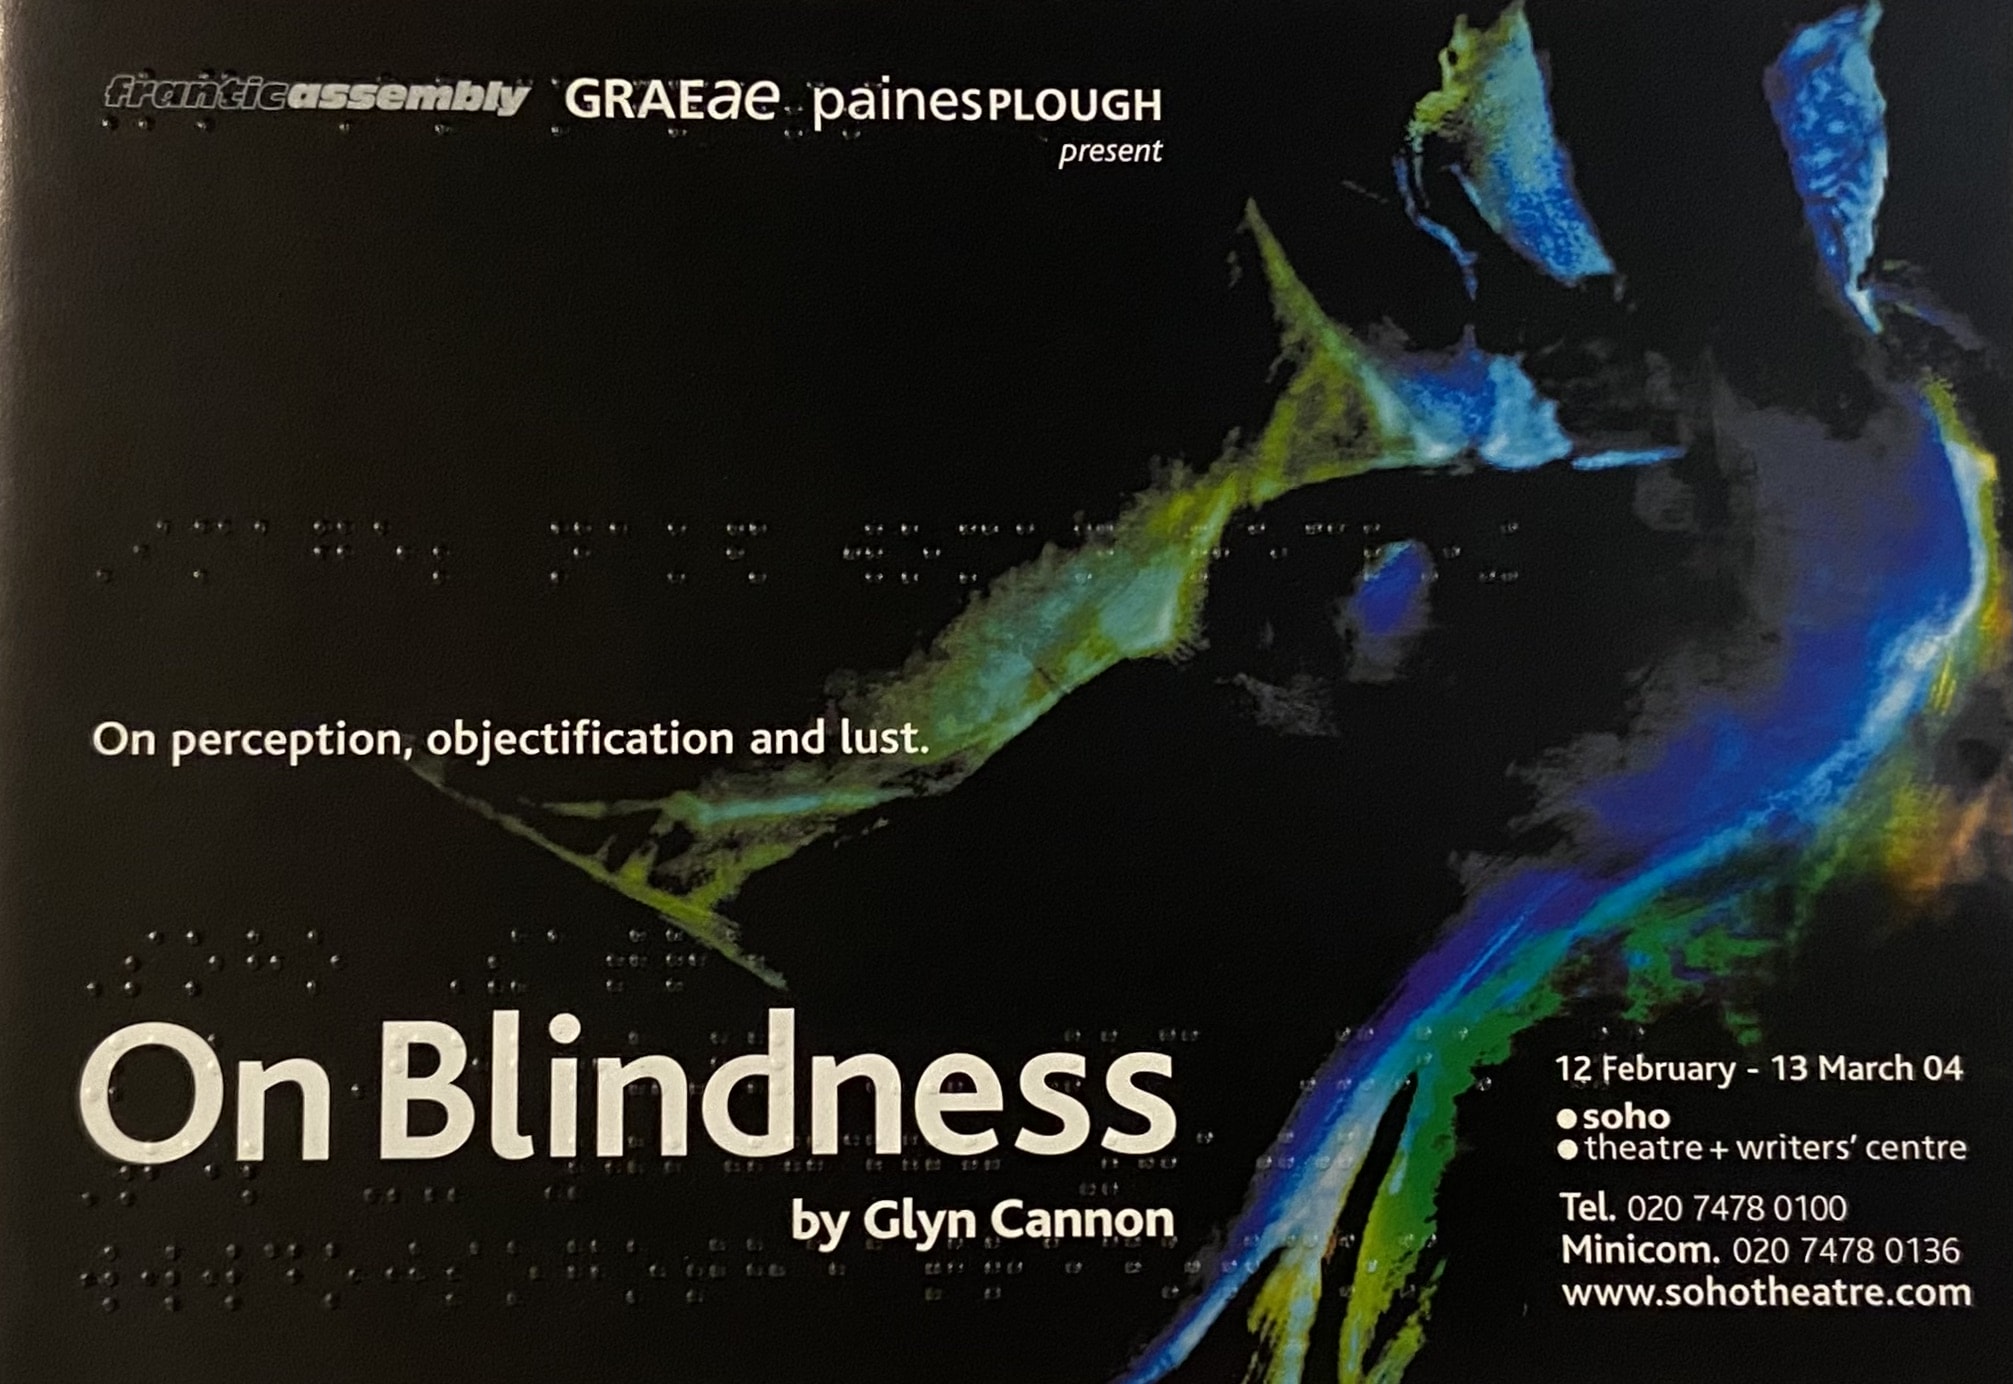 Poster for Graeae's production of 'On Blindness' by Glyn Cannon. The poster is black, green, and blue, and has an abstract painting of a body.